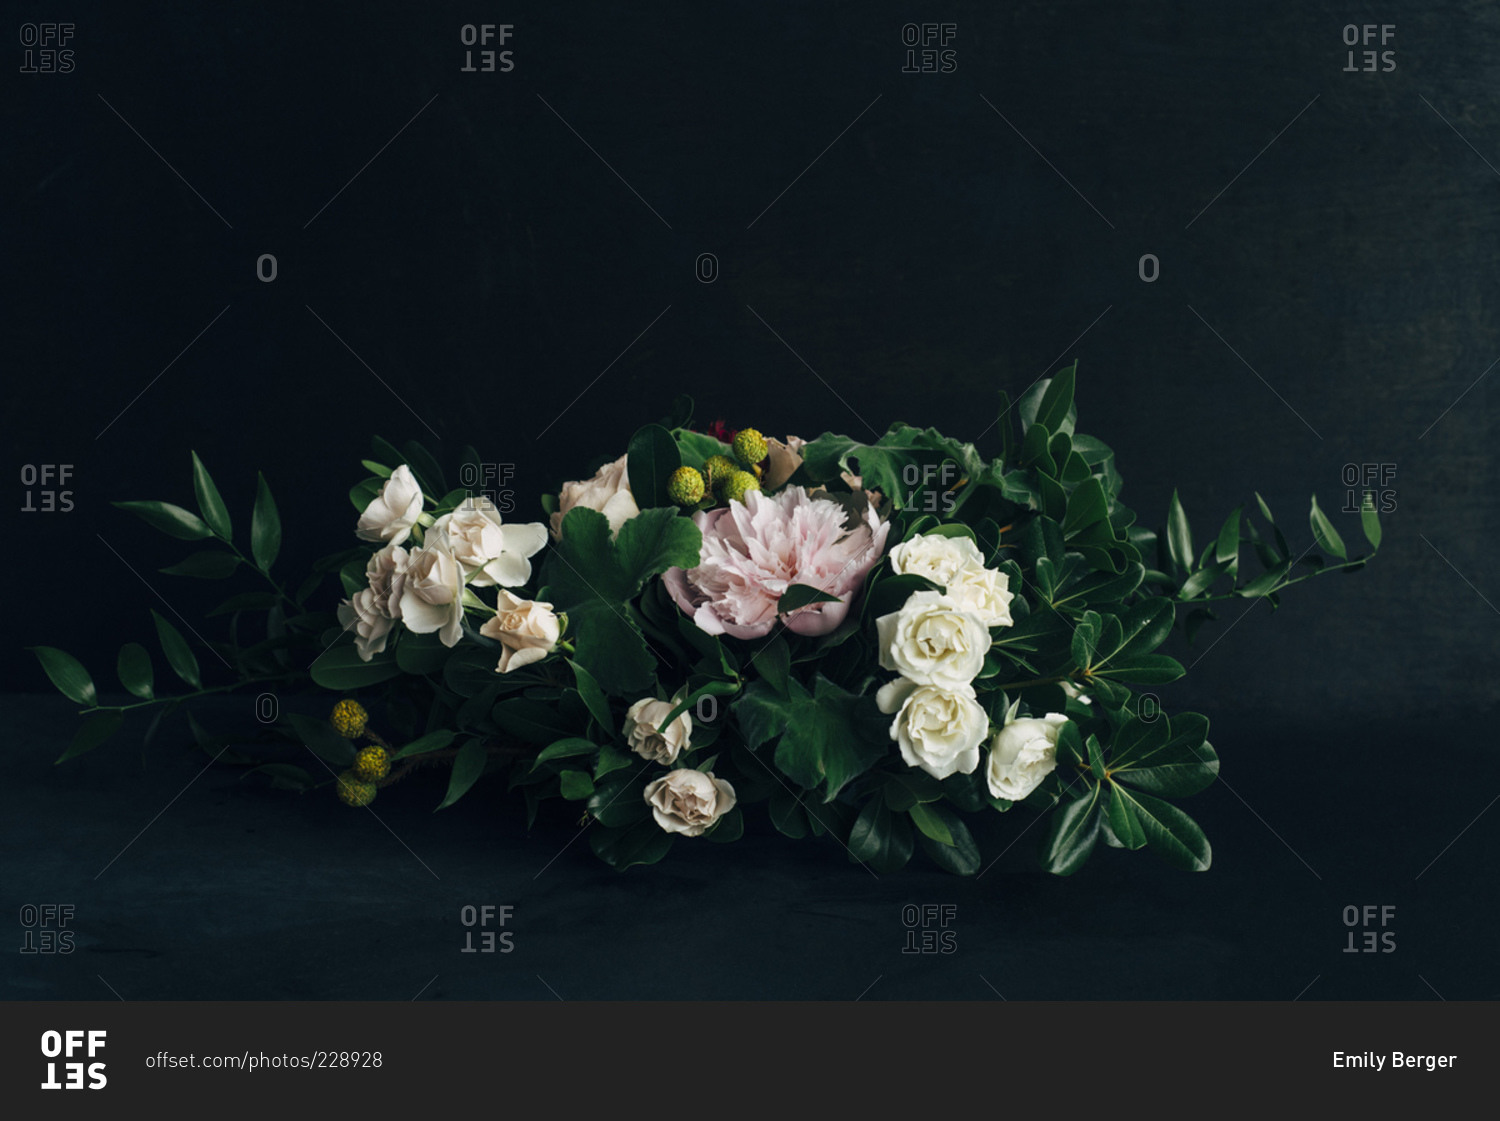 Floral arrangement with roses and peonies